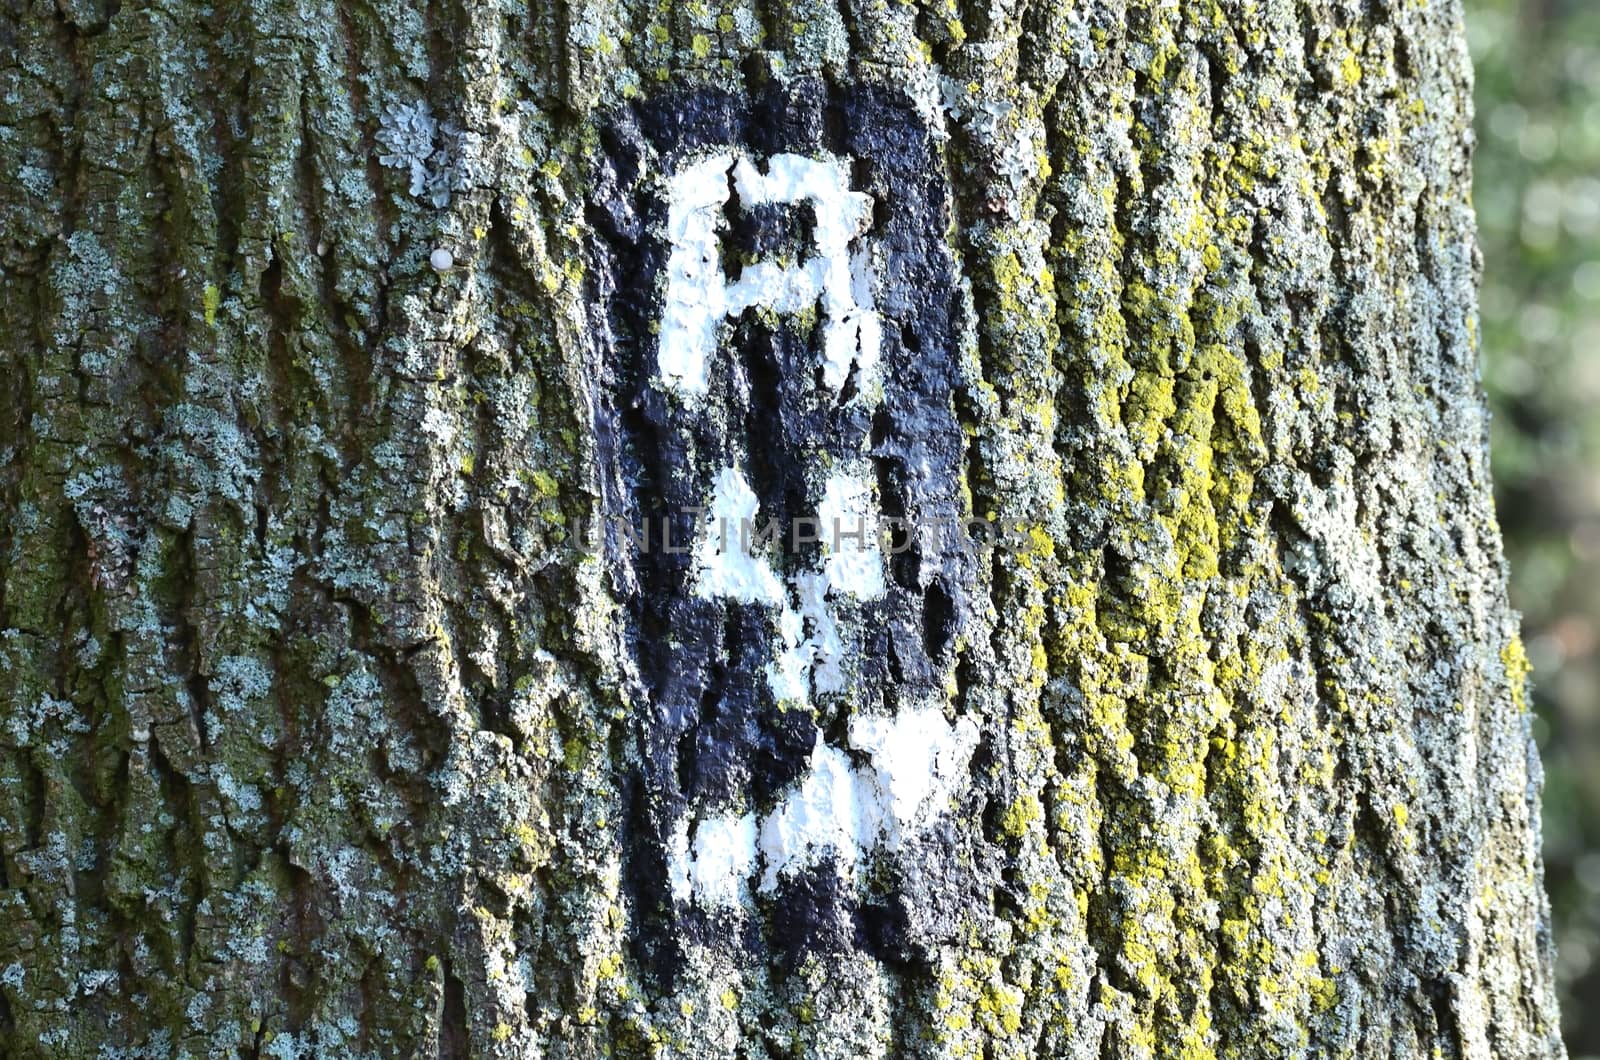 Makierungen of hiking trails through colored symbol on a tree.